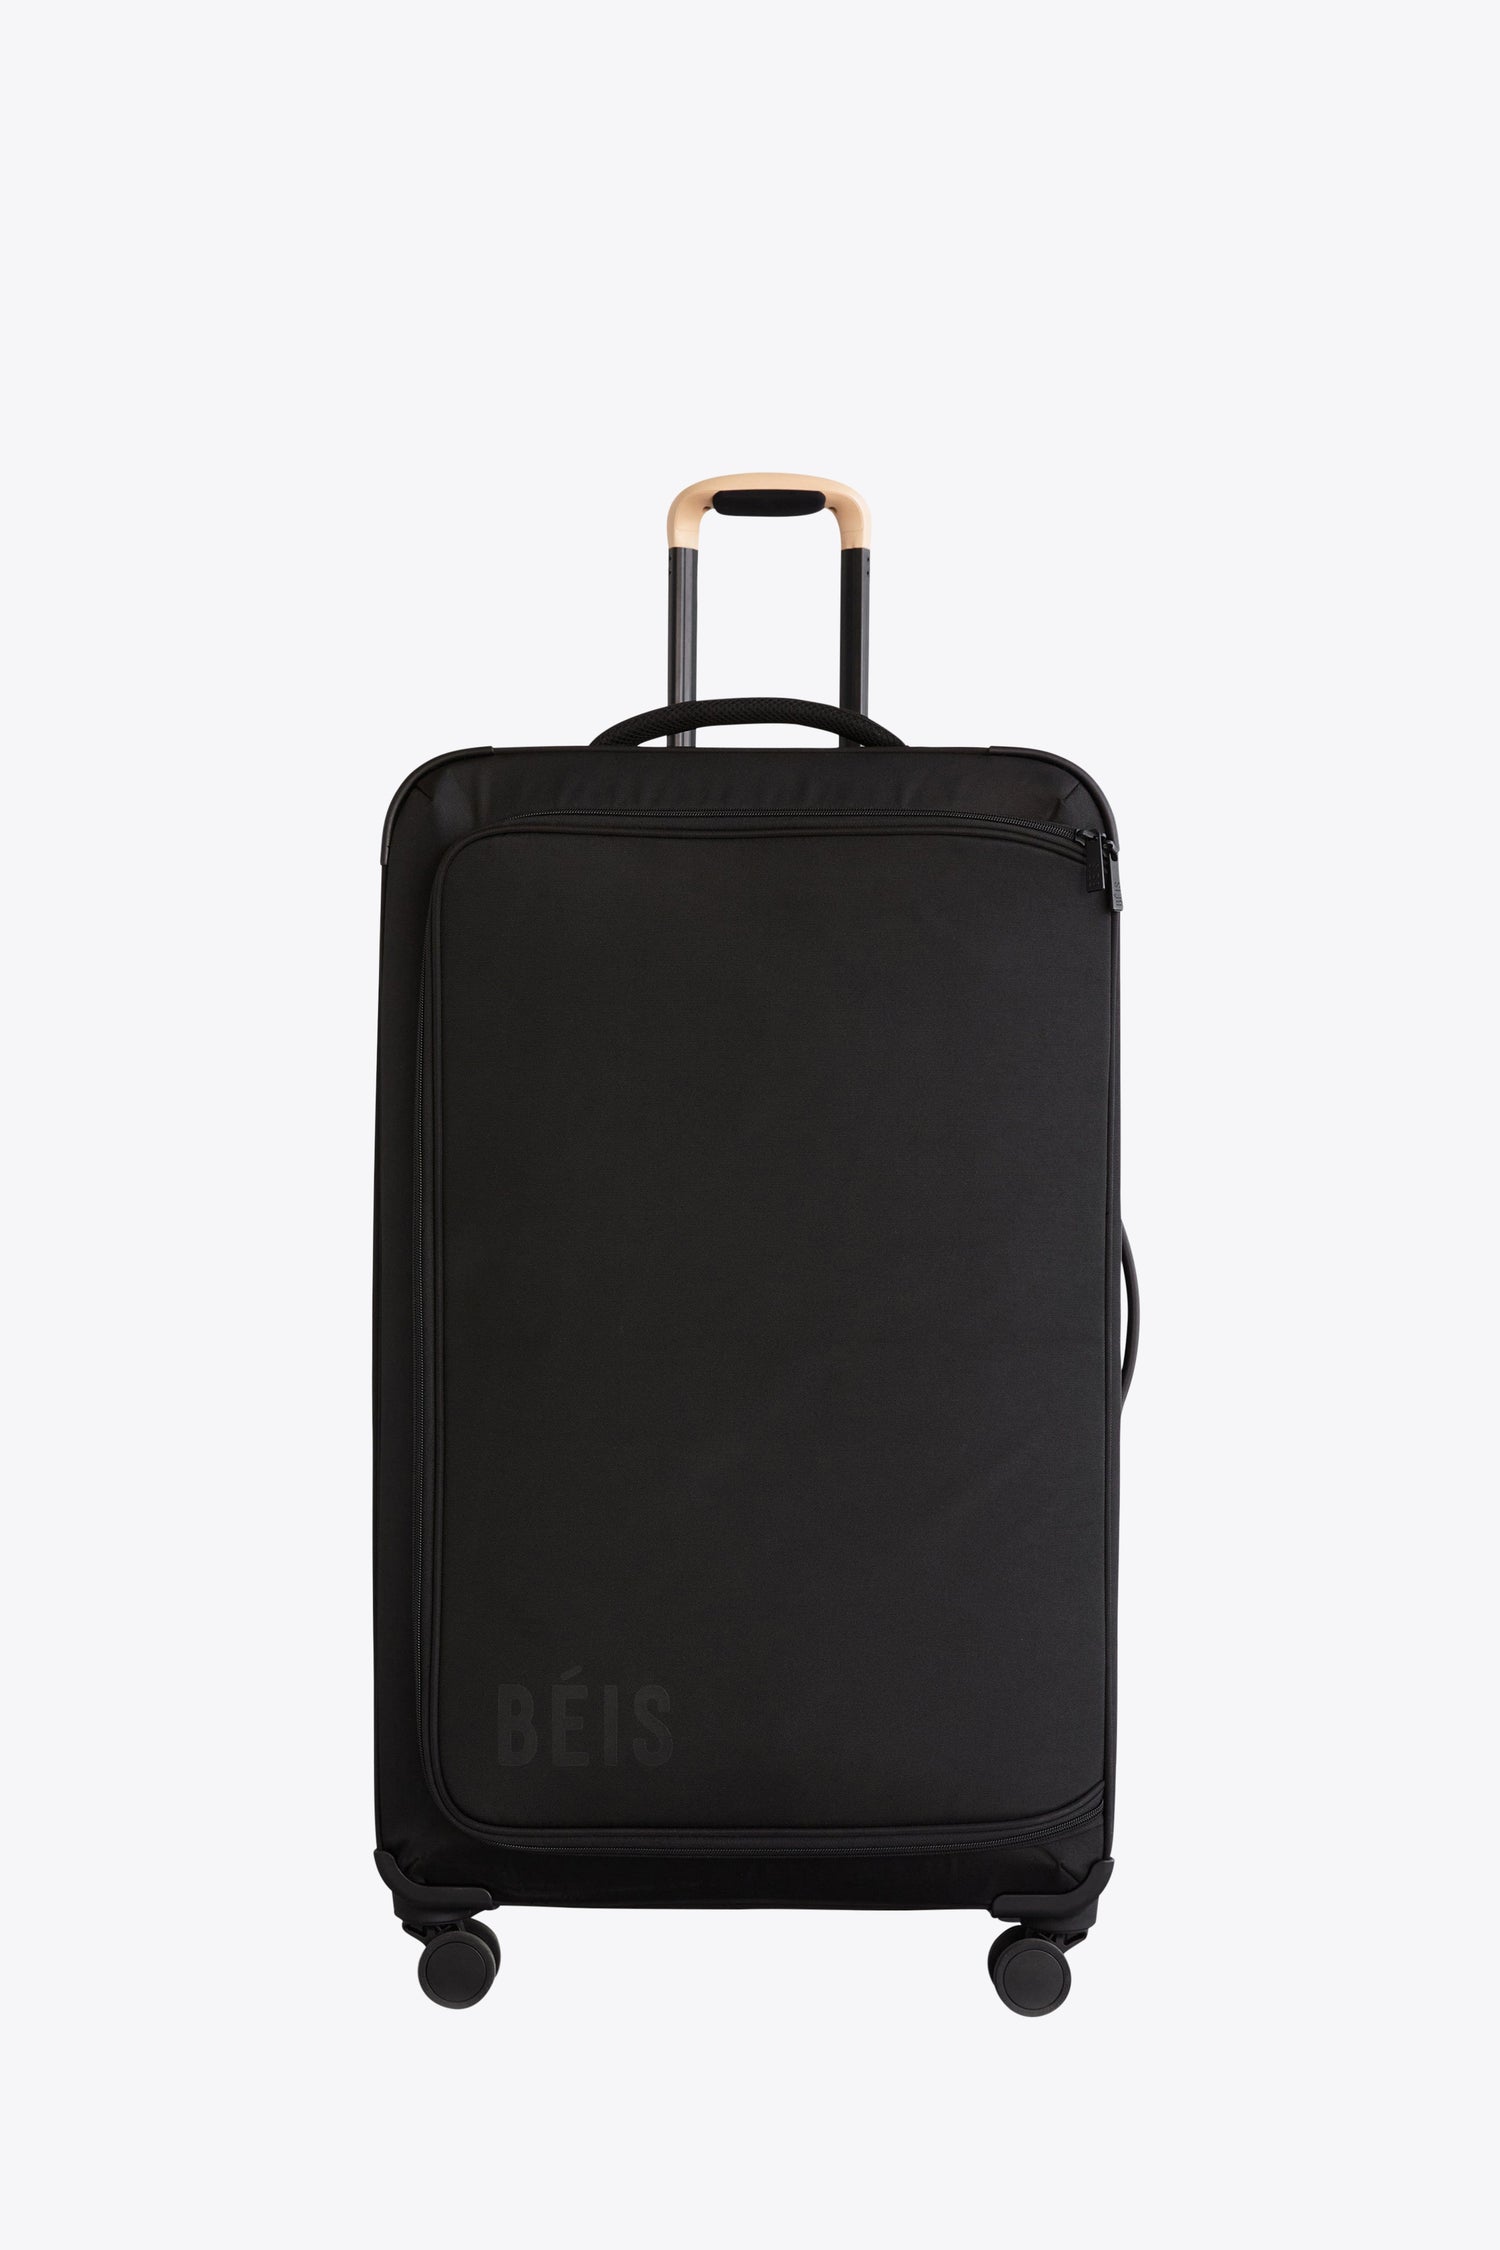 Collapsible Luggage Black